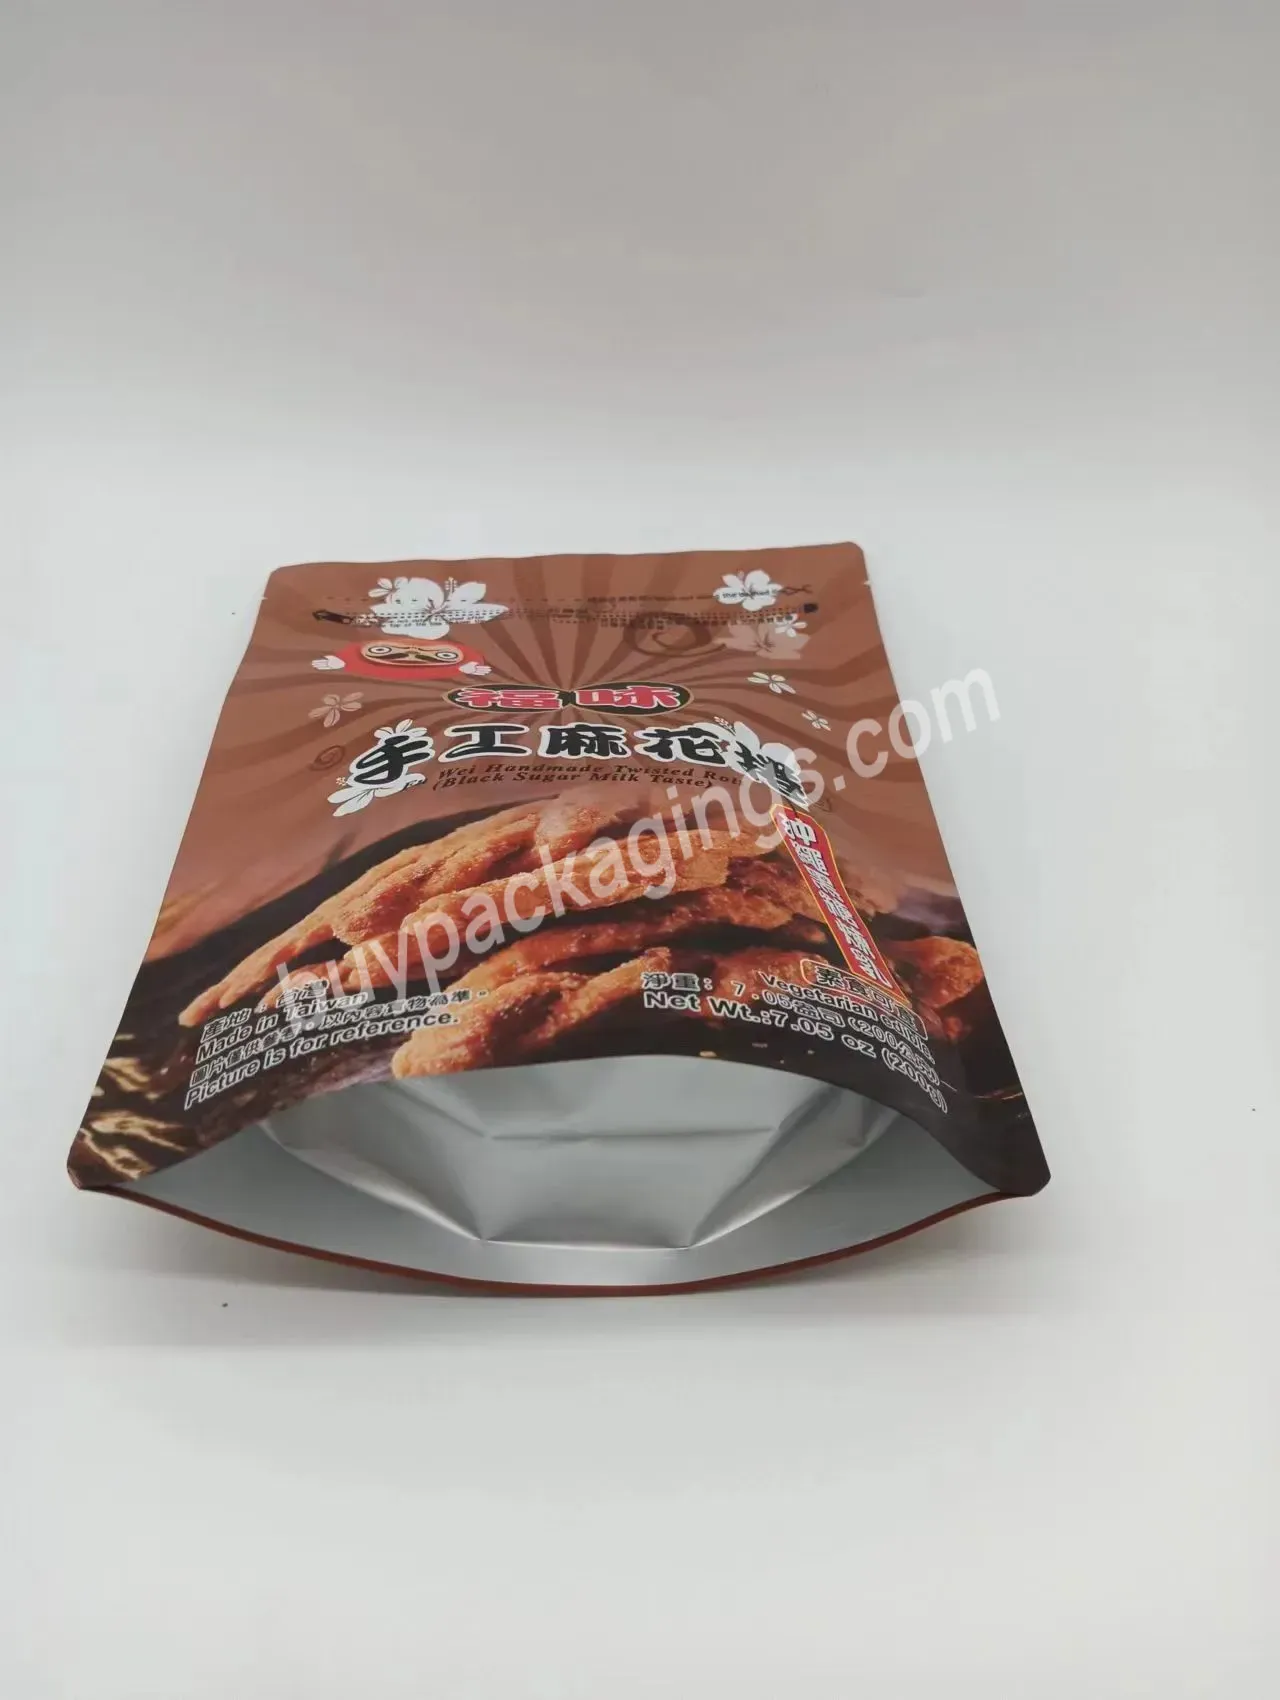 Edible Bags Design Heavy Duty Shopping Packaging Bags Supplier Hdpe Plastic China Oem Customized Logo Industrial Snack Packaging - Buy Edible Bags,Customize Fanny Pack Cheap Fanny Packs,Snack Packaging.